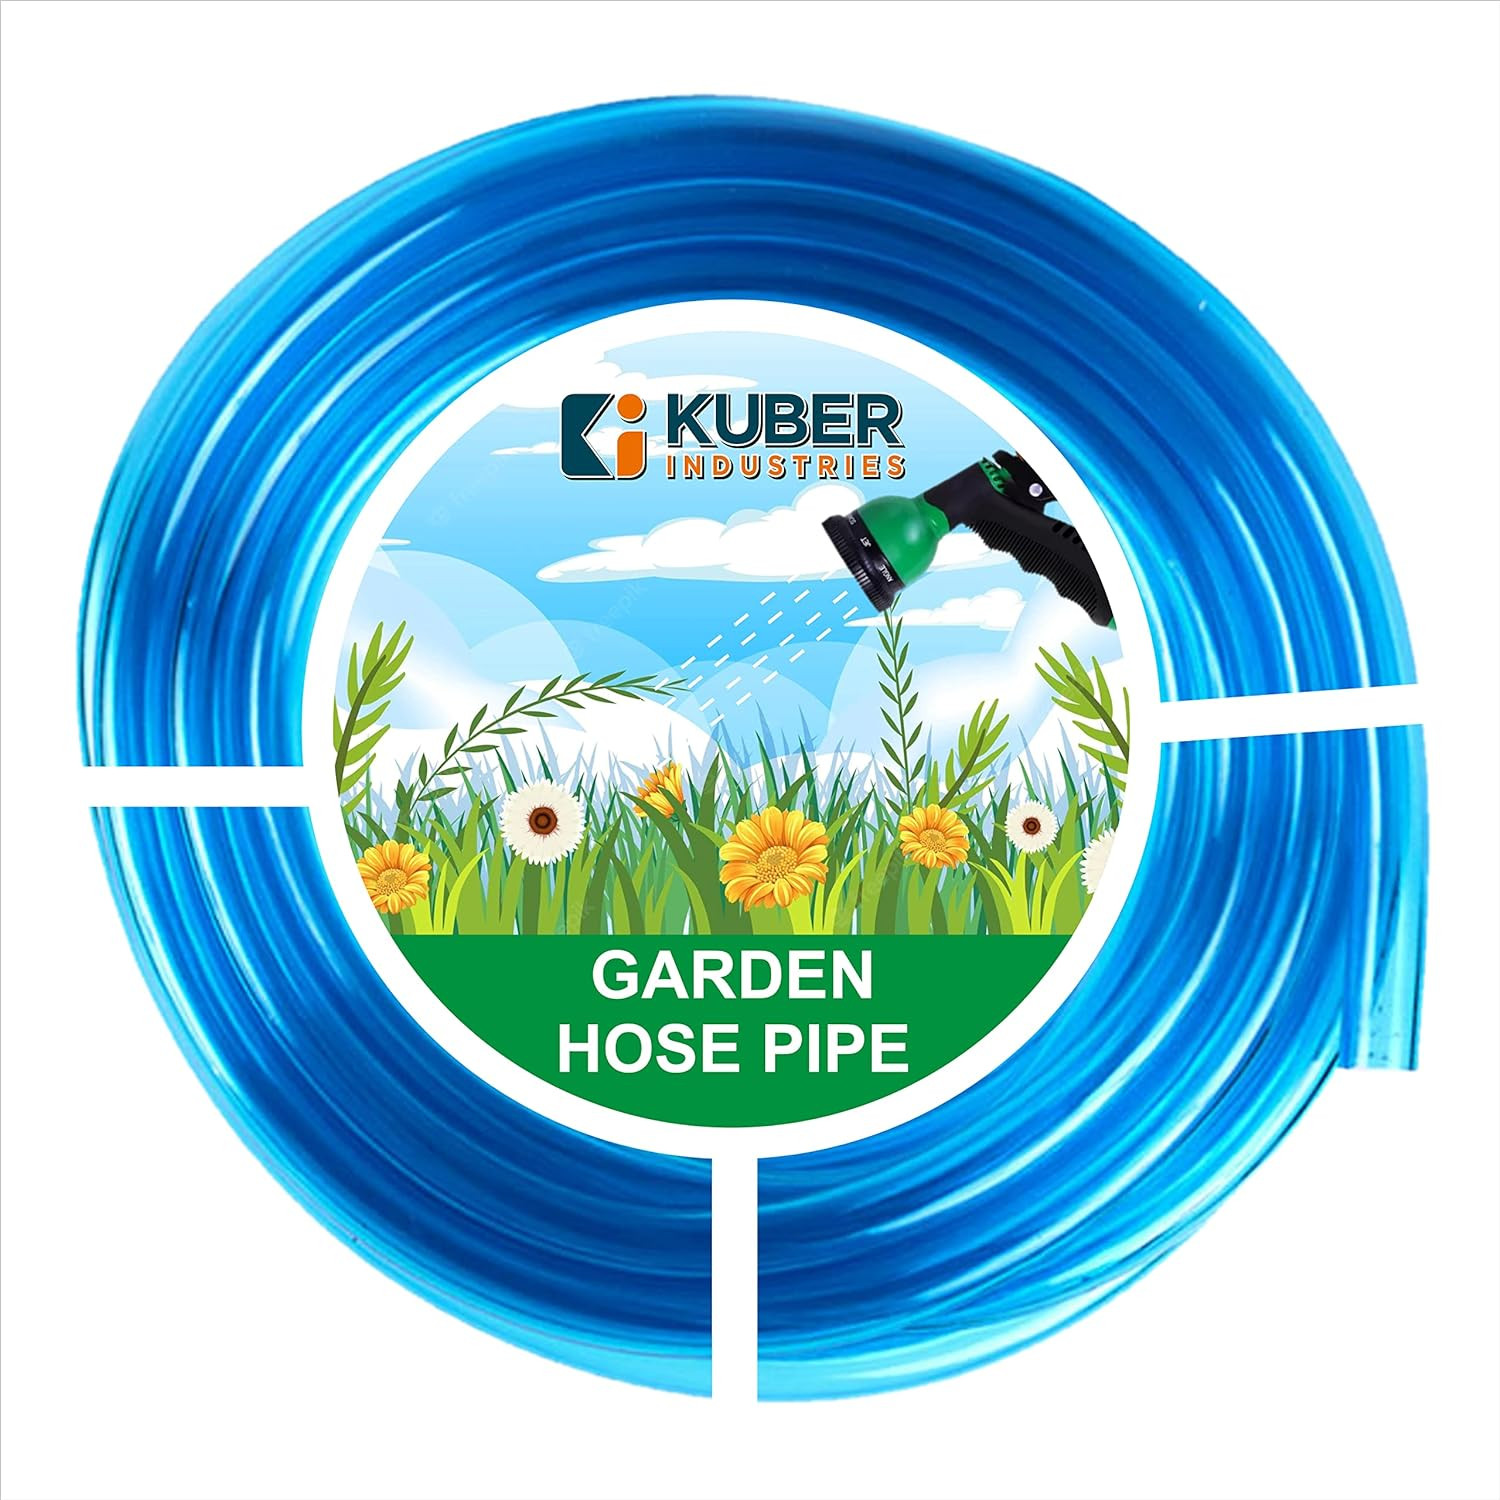 Kuber Industries Multiutility PVC Water Pipe|Multi-Utility Water Pipe for Garden, Car Cleaning & Pet Washing|Kink Proof Proof & Portable Hose Pipe for Gardening| 5 Meter|Blue |